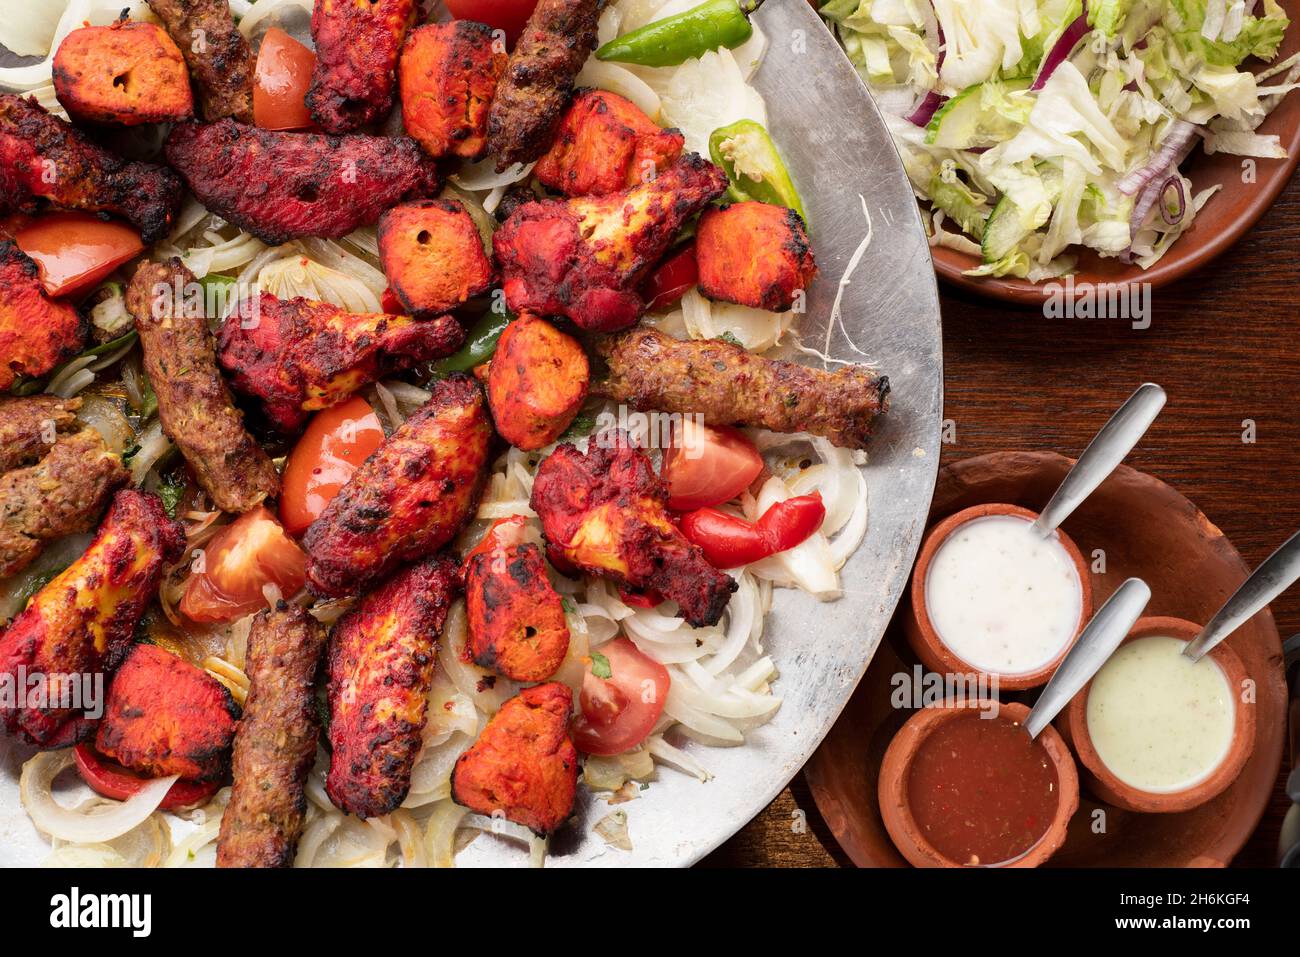 Sheffield UK – 11 May 2018: Afghan shared platter meal for four with spicy grilled vegetables, sheesh kebab and tikka chicken wings Stock Photo